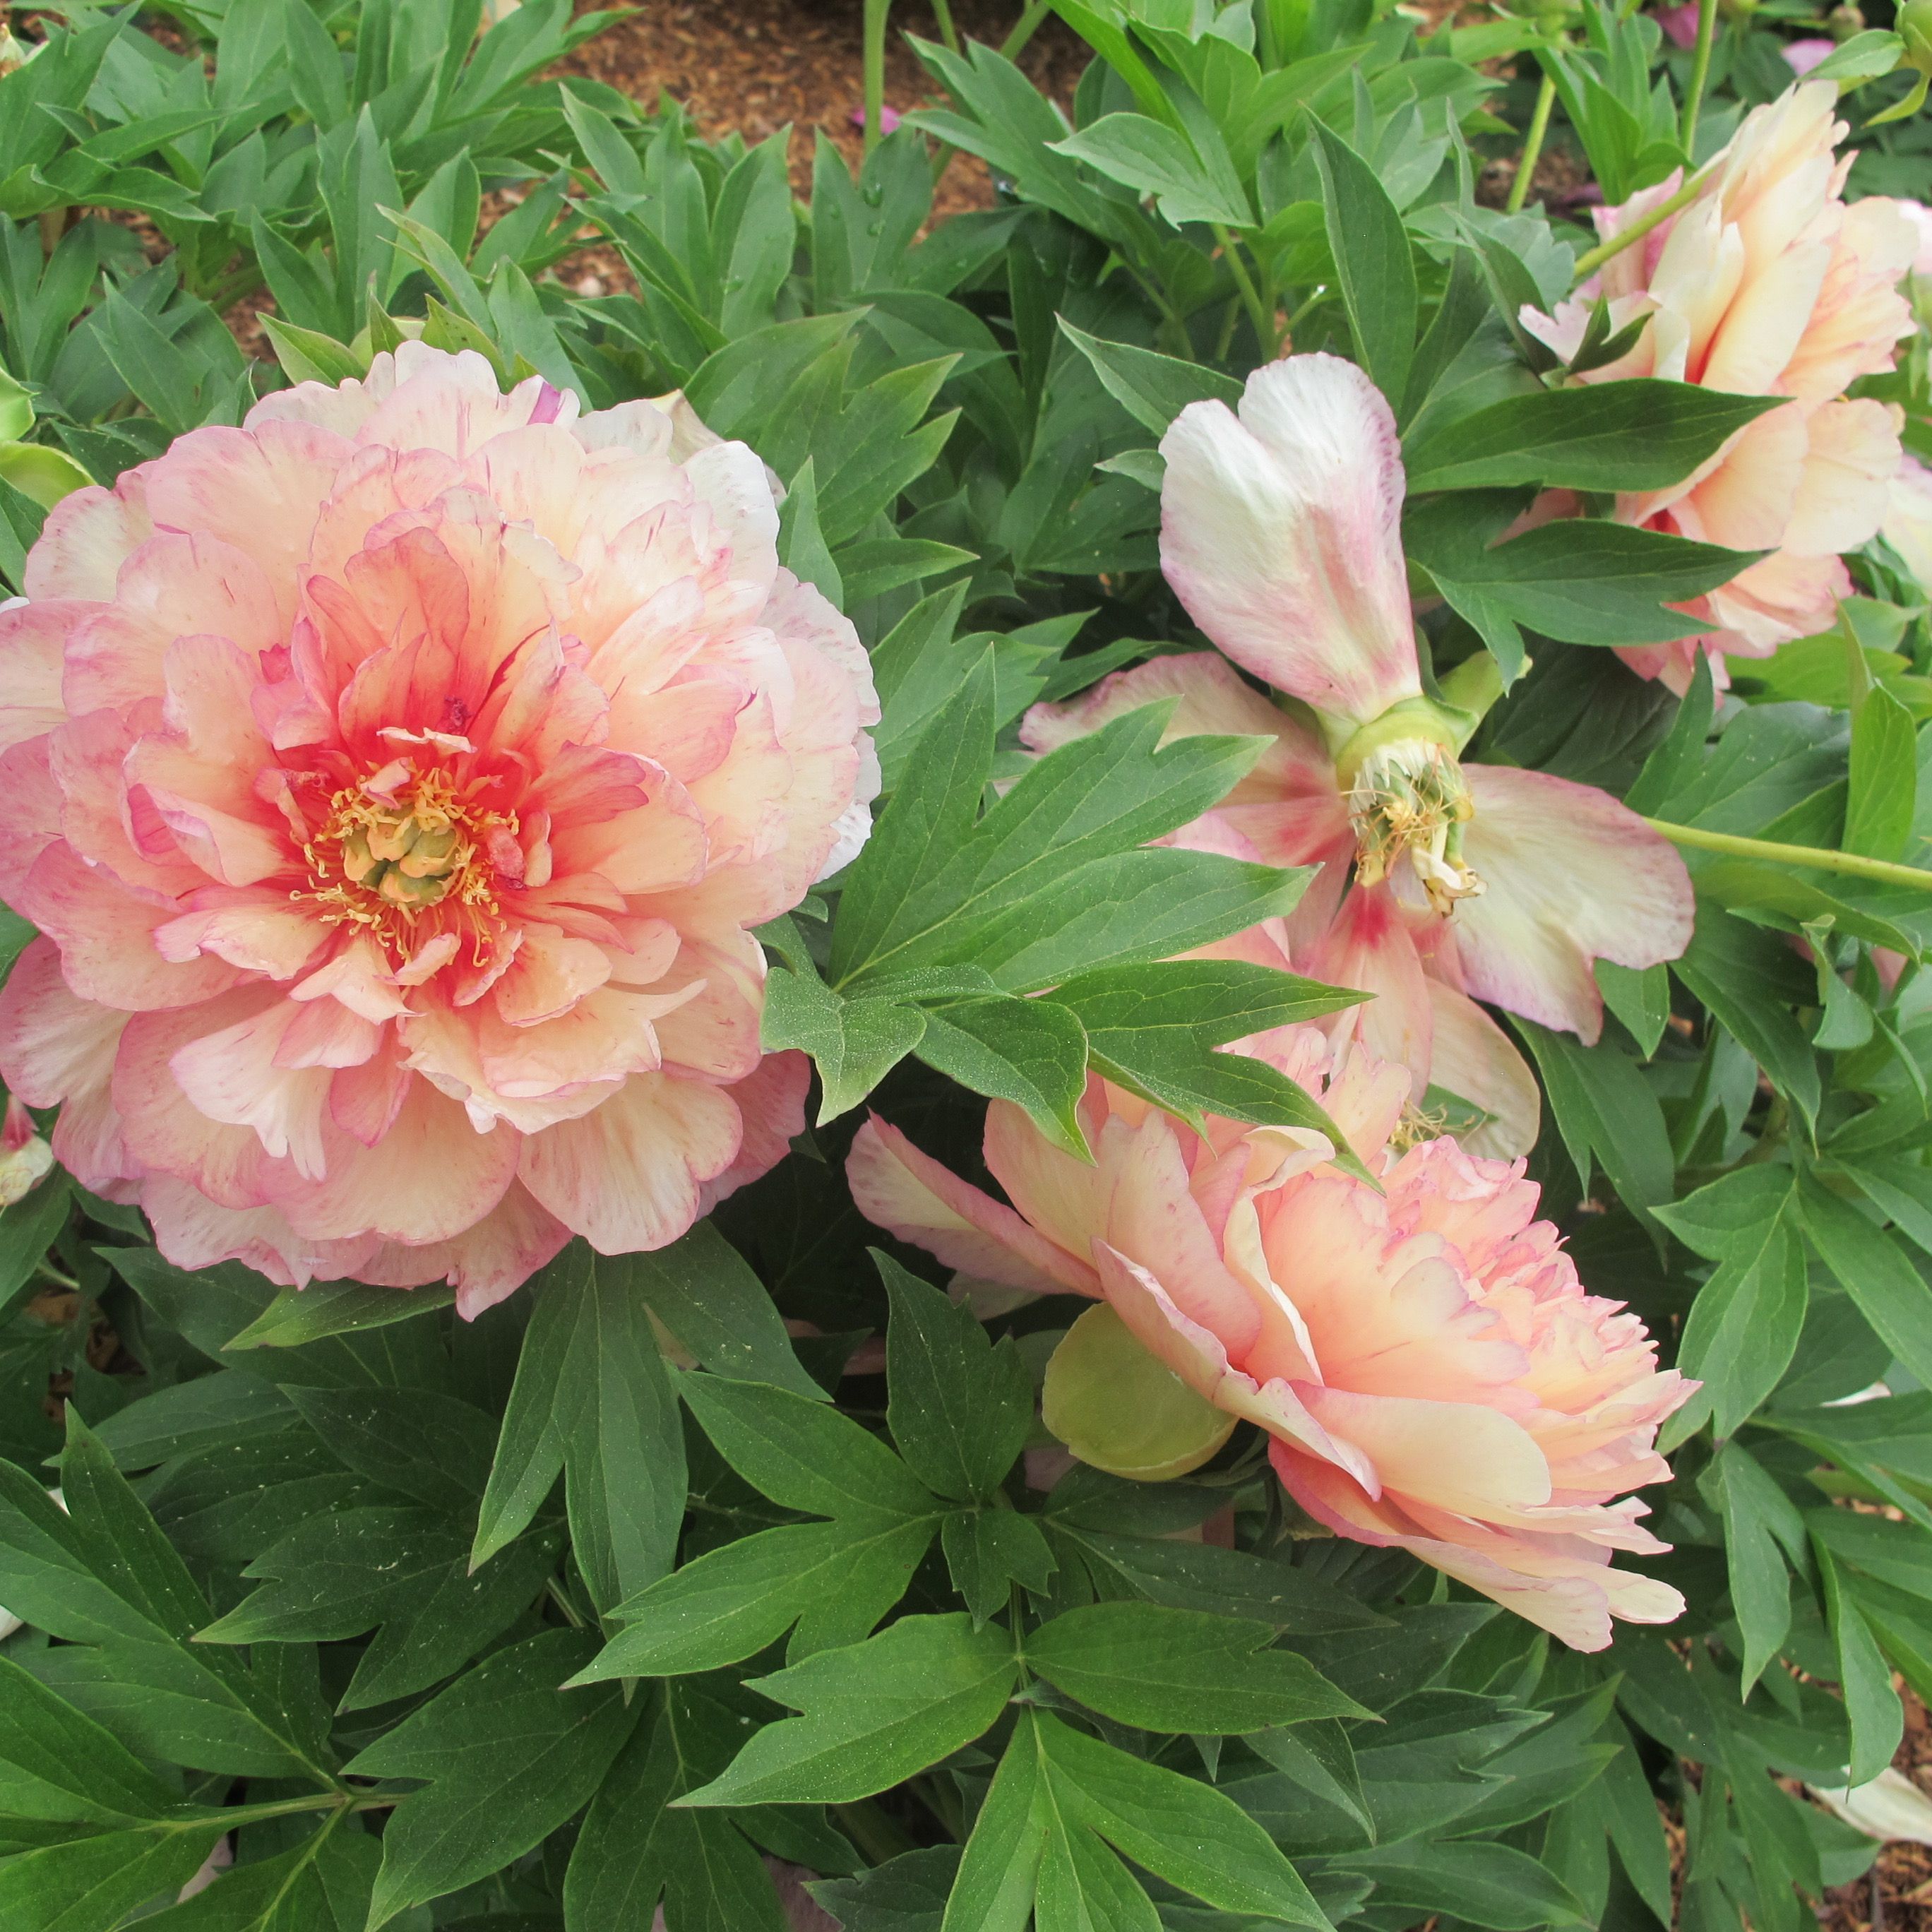 images/plants/paeonia/pae-truly-scrumptious/pae-truly-scrumptious-0005.JPG